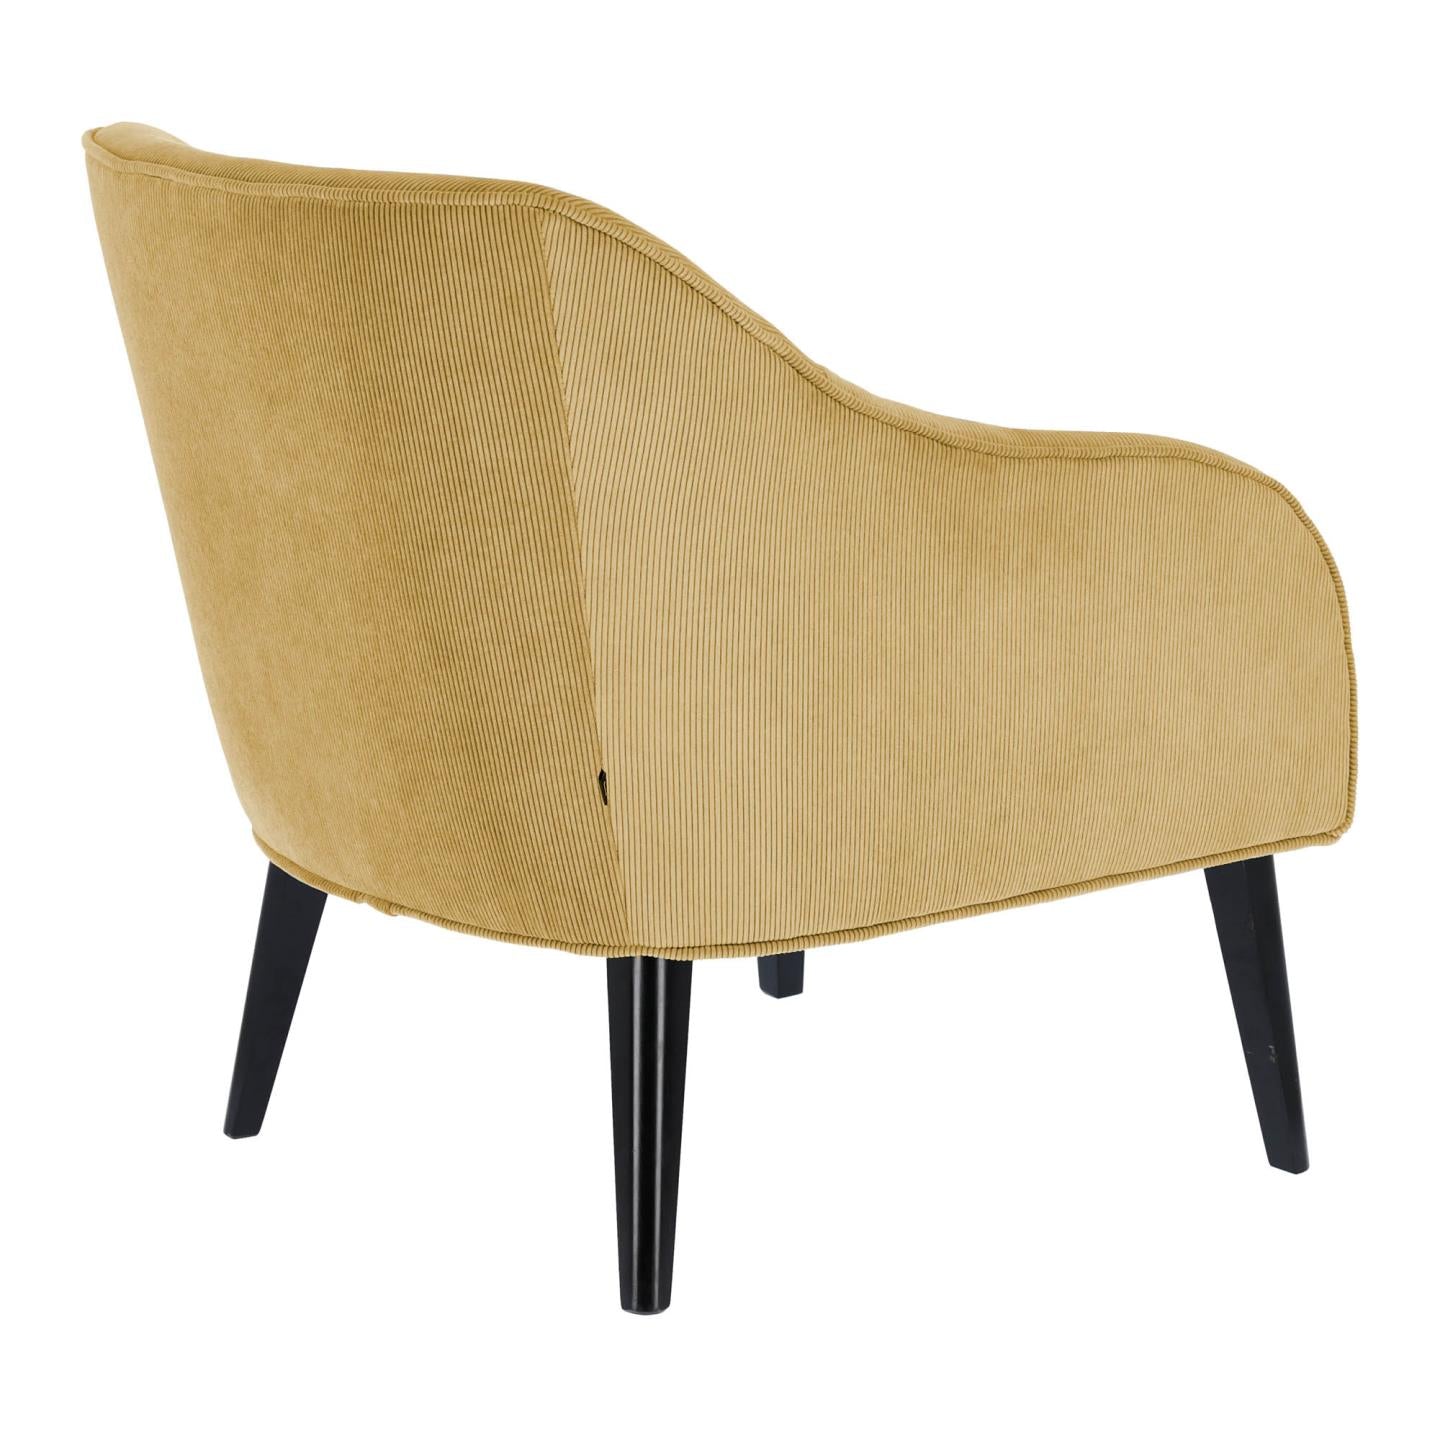 Bobly armchair in mustard corduroy with wenge finish legs